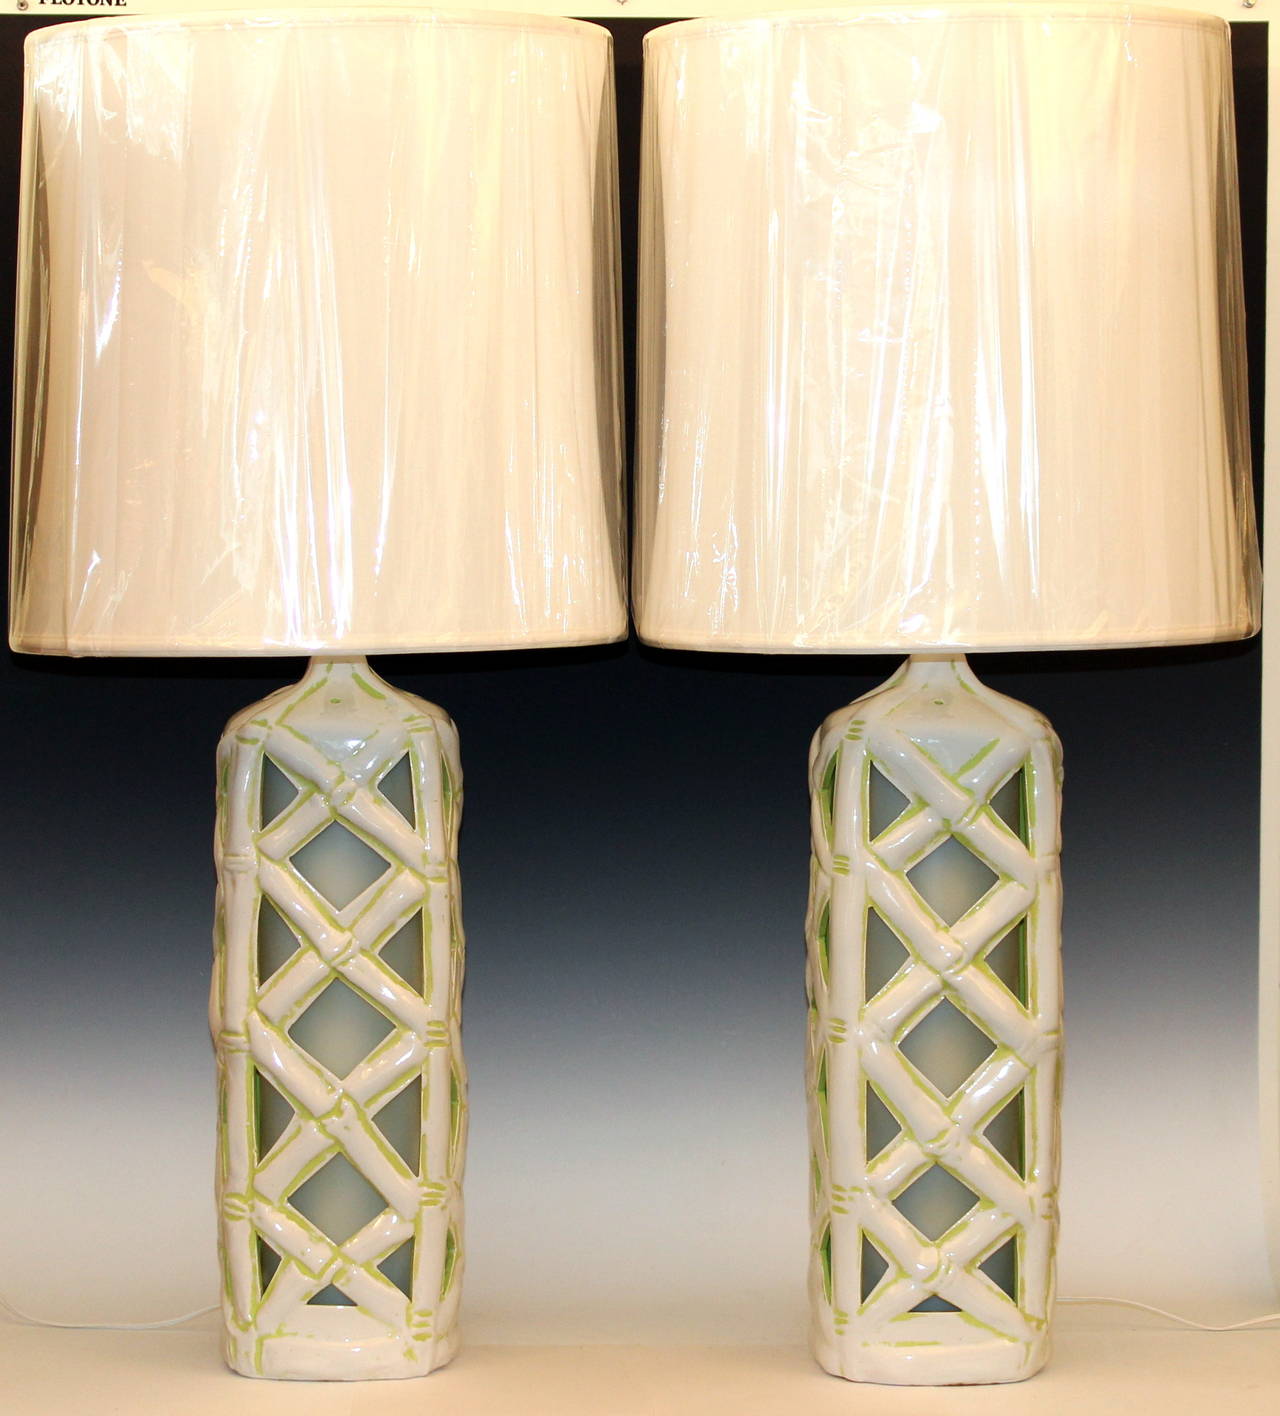 Large pair of vintage faux bamboo art pottery lamps in white with green highlights, circa 1960's. With interior night lanterns that show off the bamboo lattice bungalow tiki hut design.  3-way main light and separate switch for lantern at base. 37